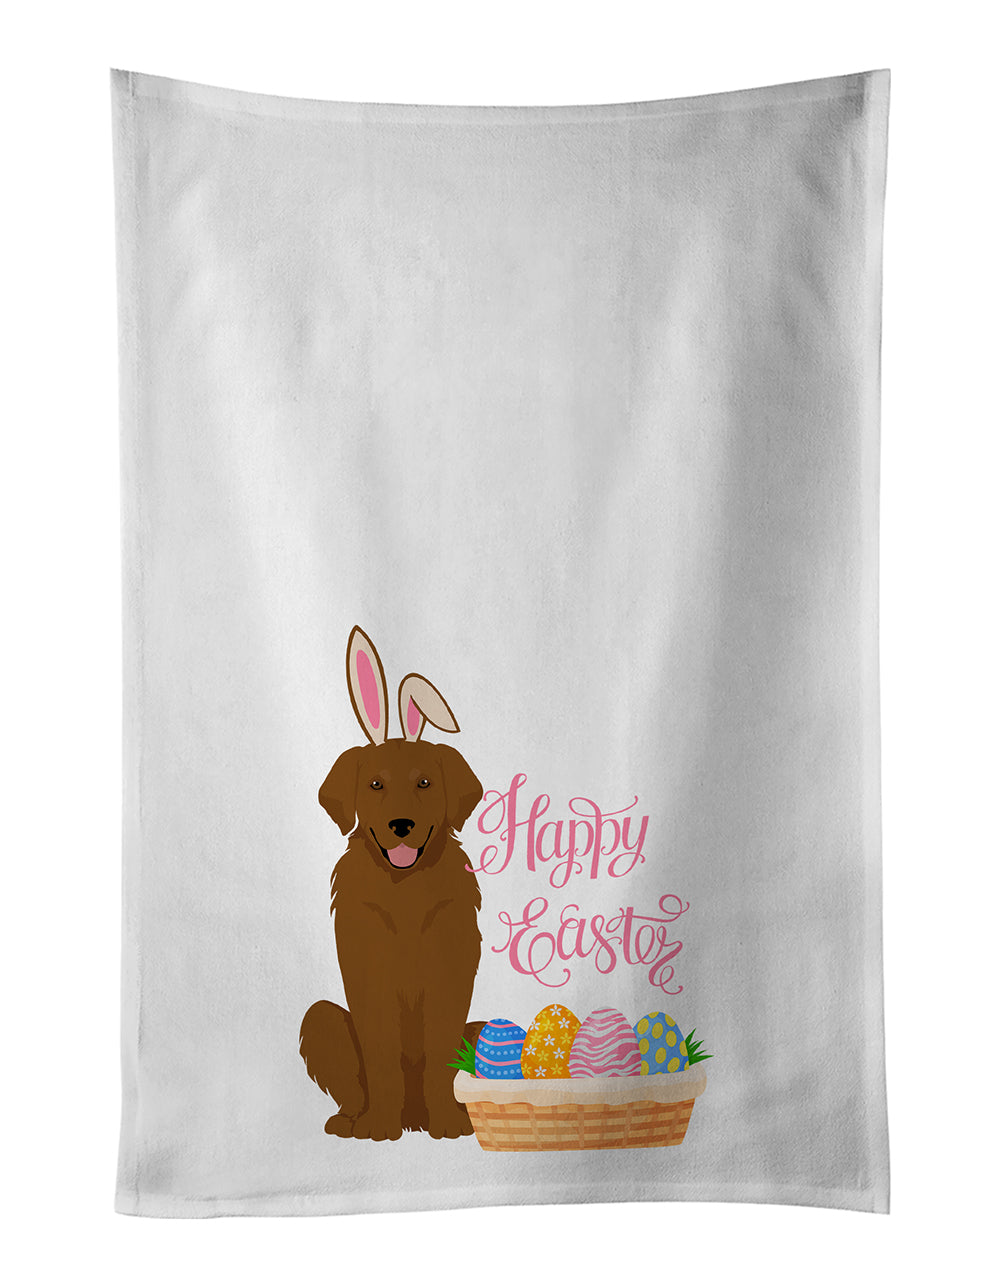 Buy this Mahogany Golden Retriever Easter White Kitchen Towel Set of 2 Dish Towels